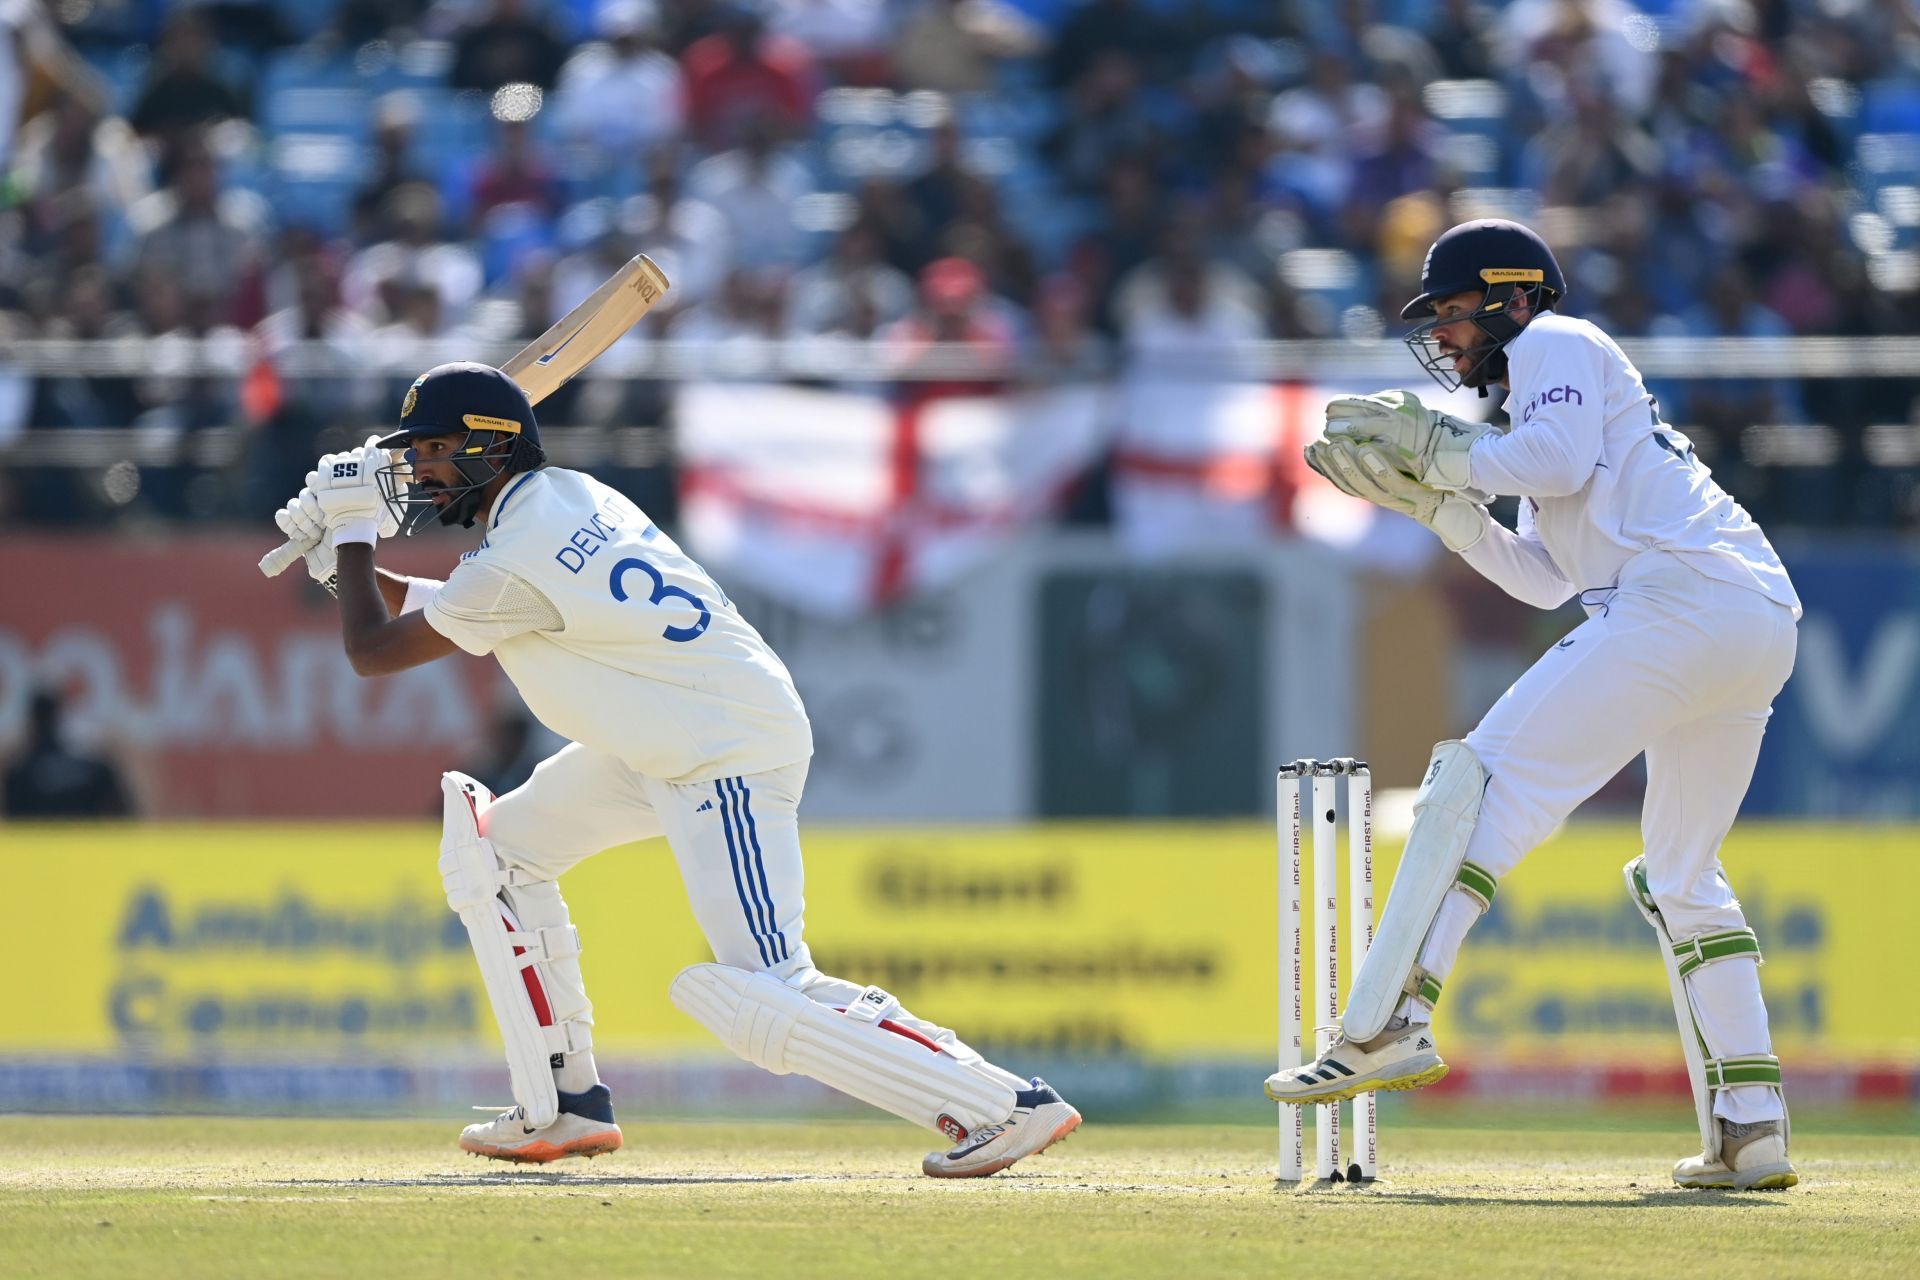 Padikkal bats: India v England - 5th Test Match: Day Two